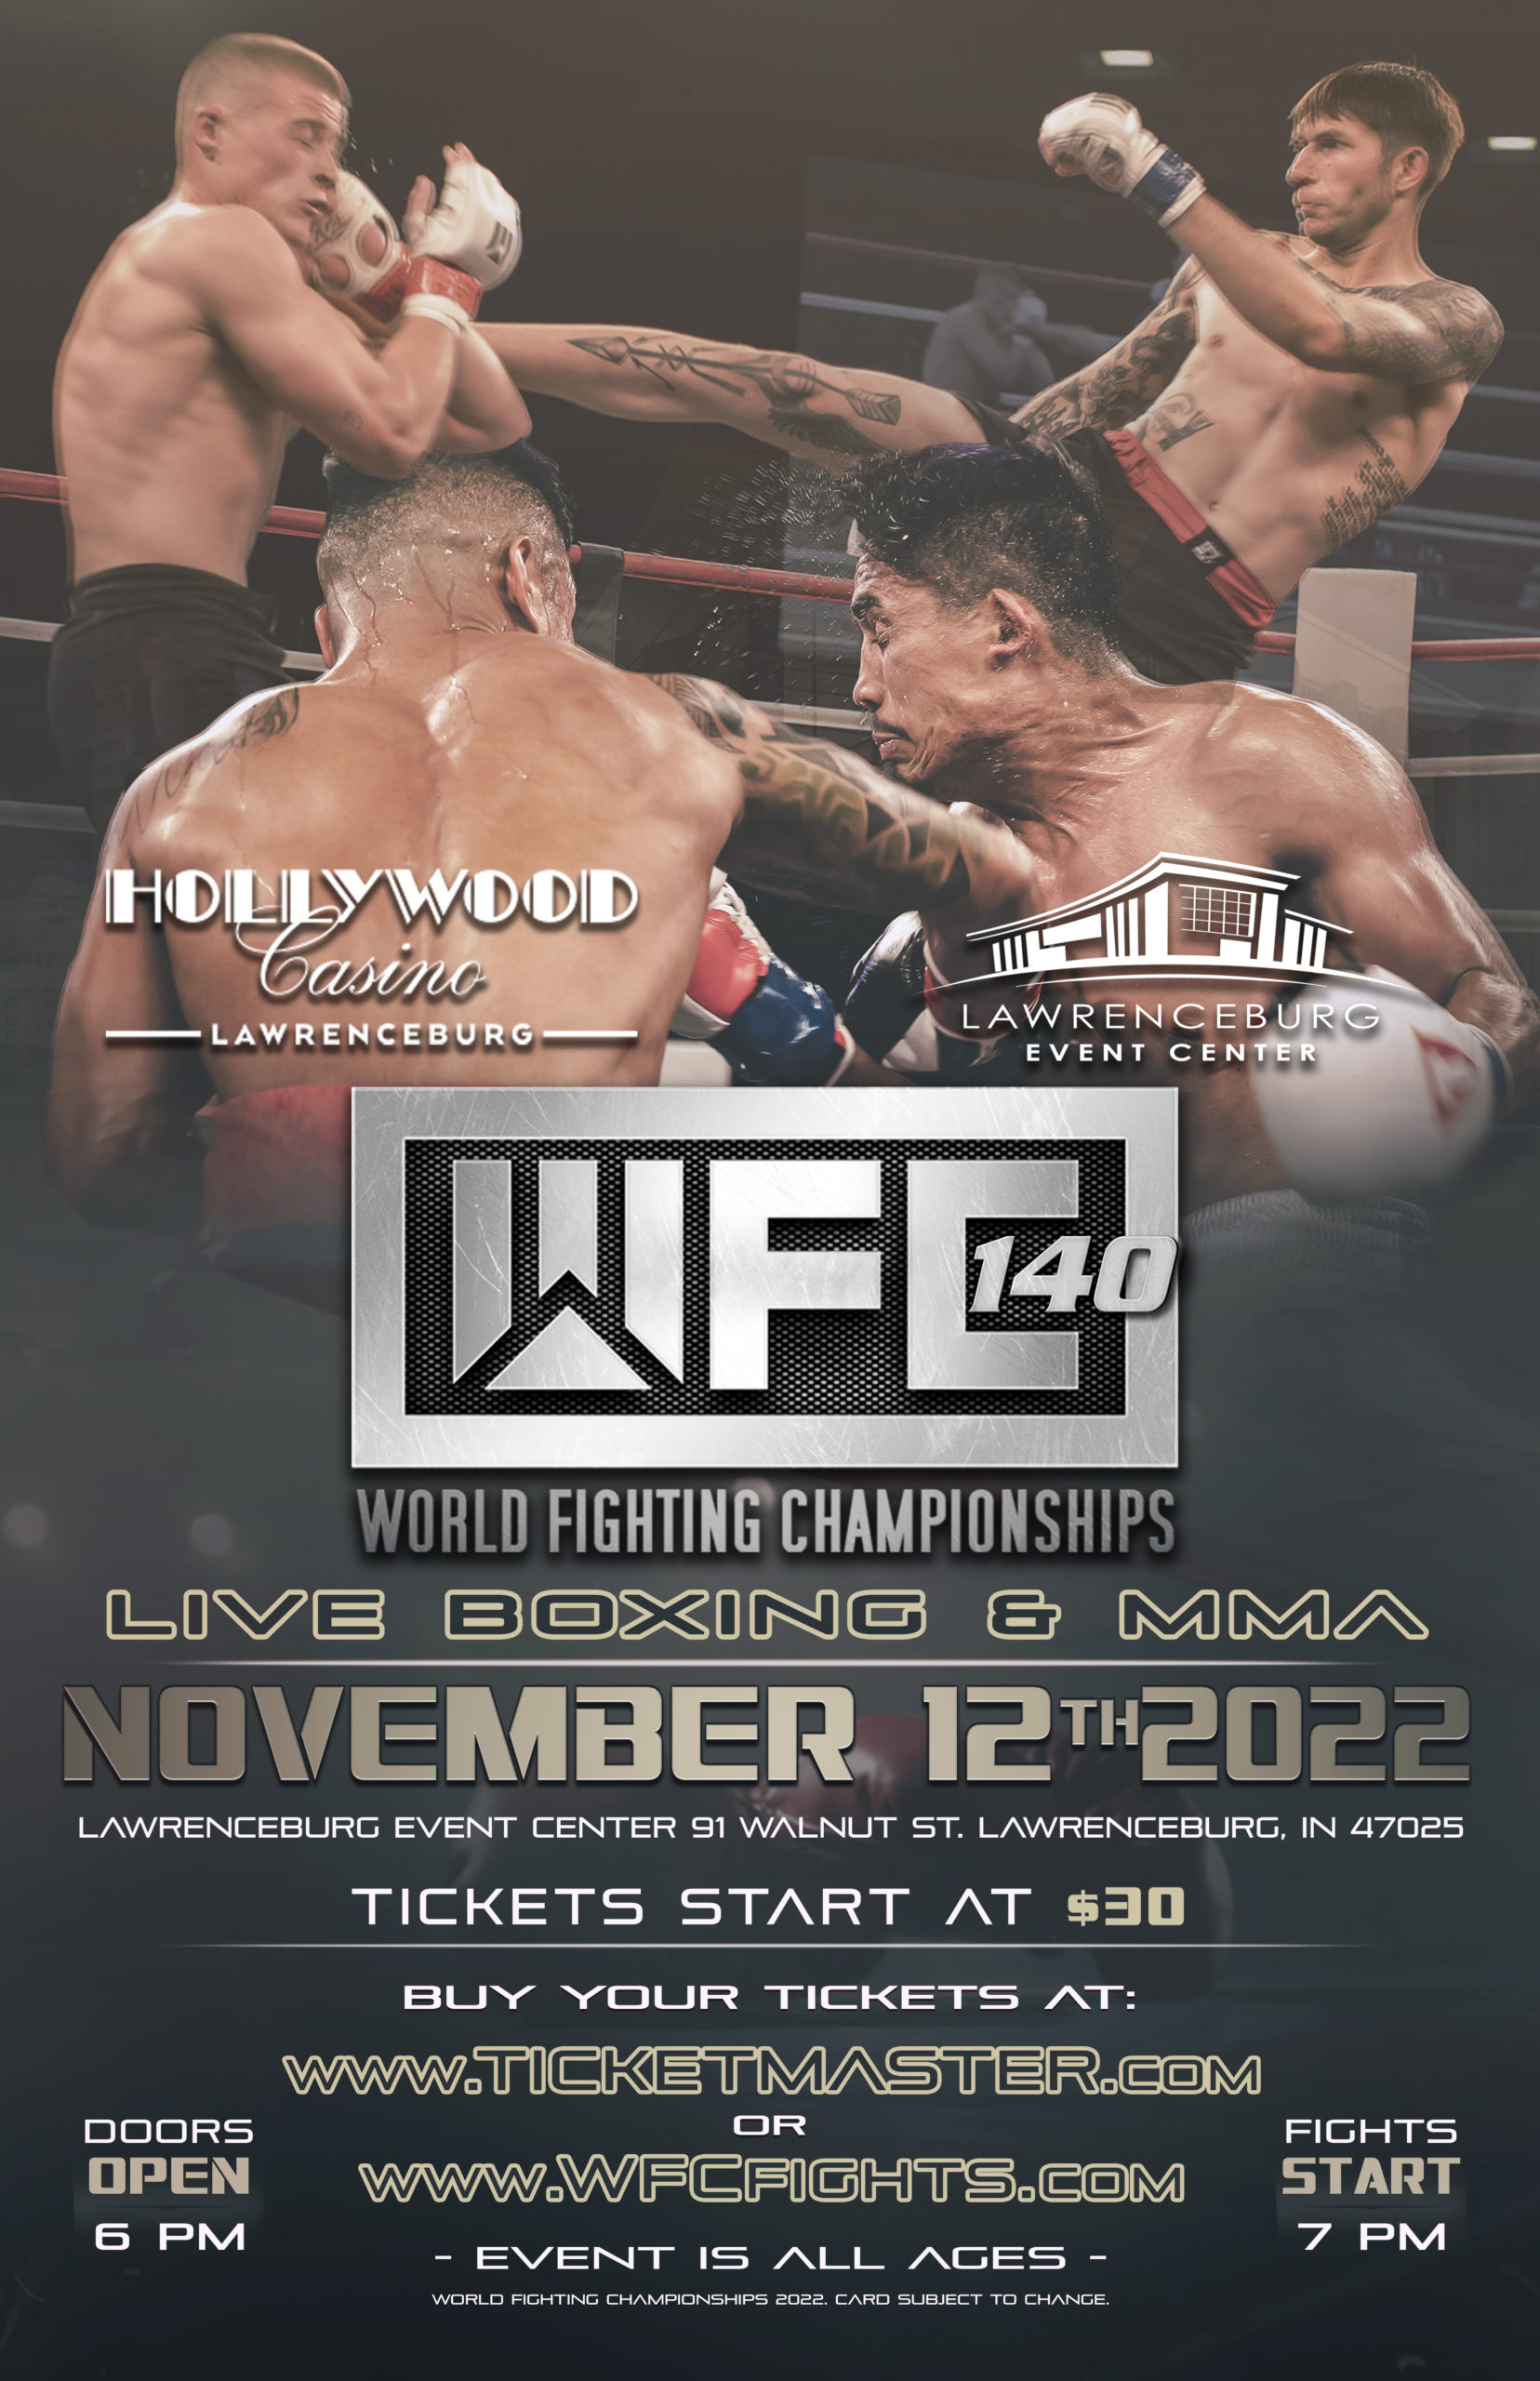 WFC 140 LIVE Boxing and MMA November 12th,2022 at Lawrenceburg Event Center